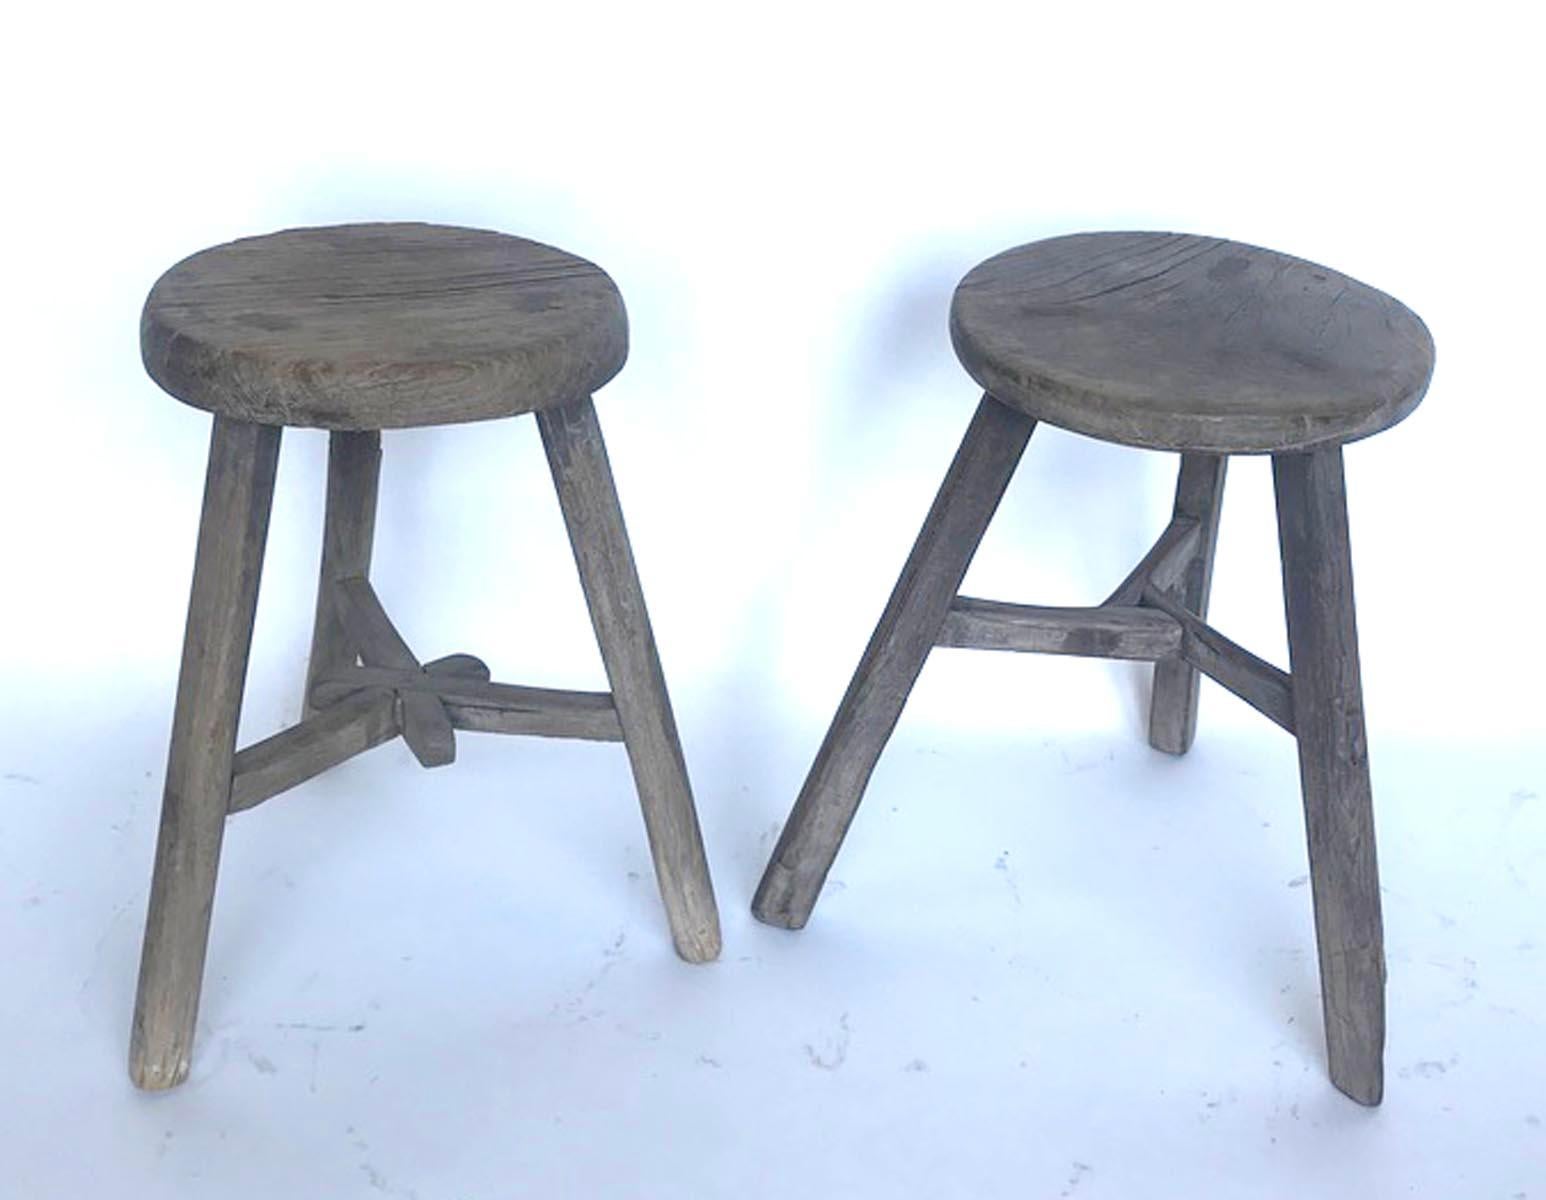 19th c. Chinese elm stools with various base configurations. Smooth, weathered, worn grey patina. Mortise and tenon joinery. Great for extra seating, a small side table or as a plant stand.
Sold separately, $785 each. Please refer to left or right